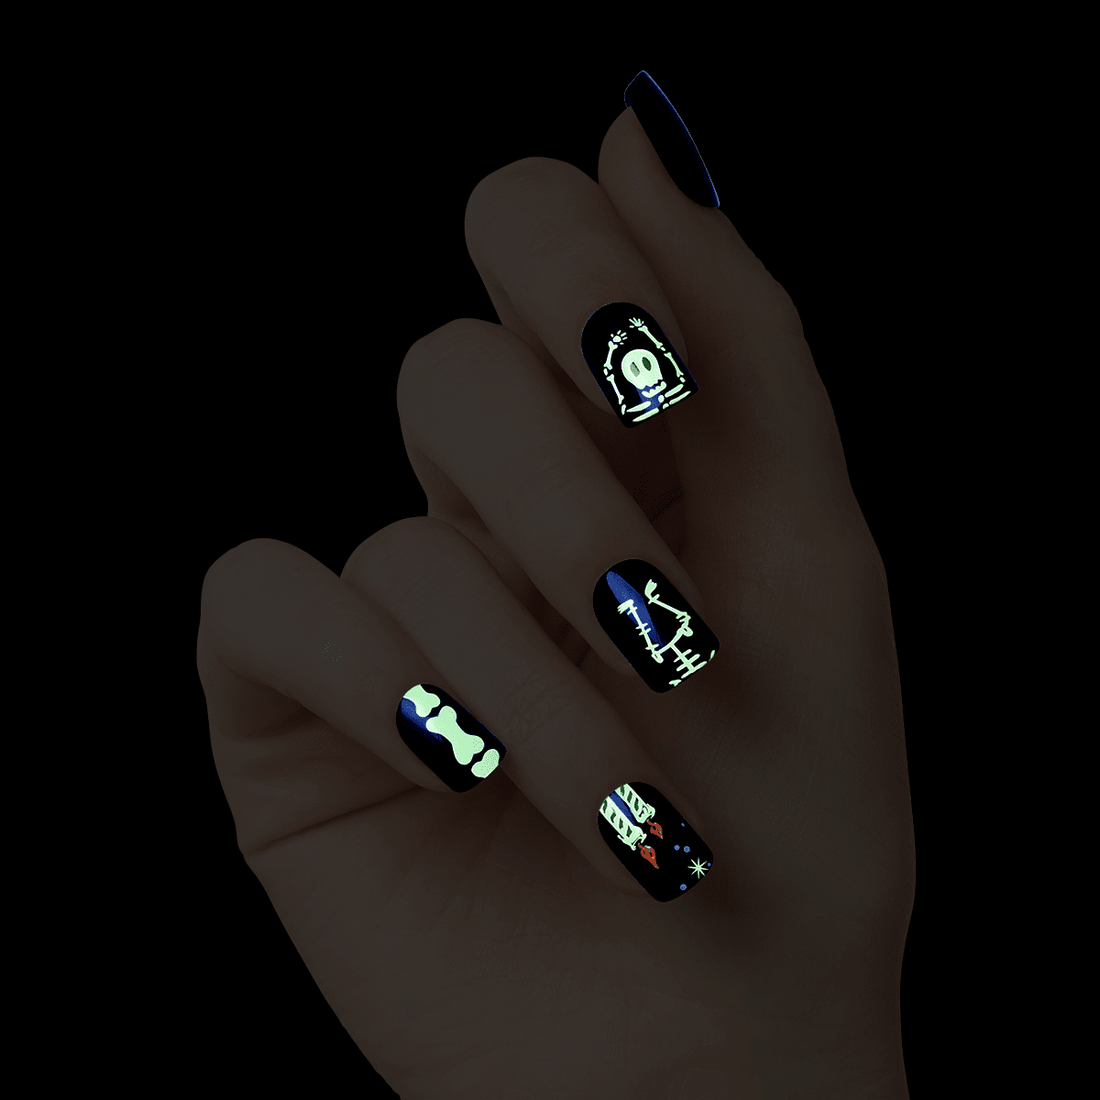 KISS Voguish Fantasy Glow-In-The-Dark Halloween Nails - The thing